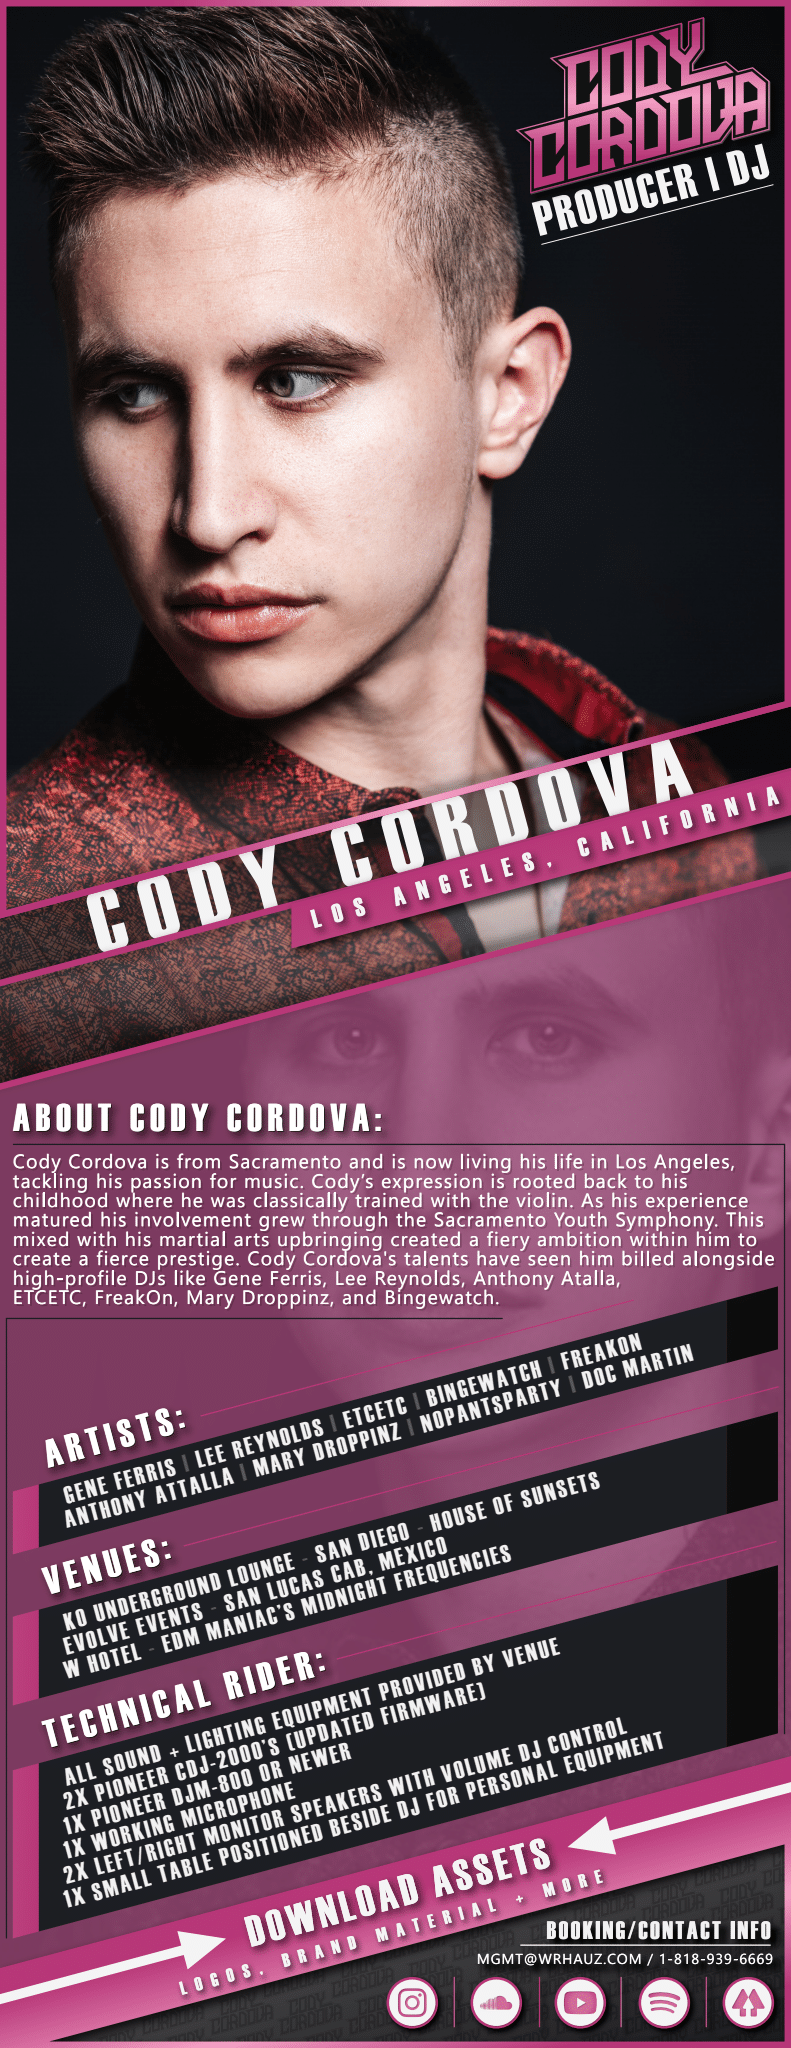 Official EPK for Los Angeles based Tech House artist Cody Cordova.